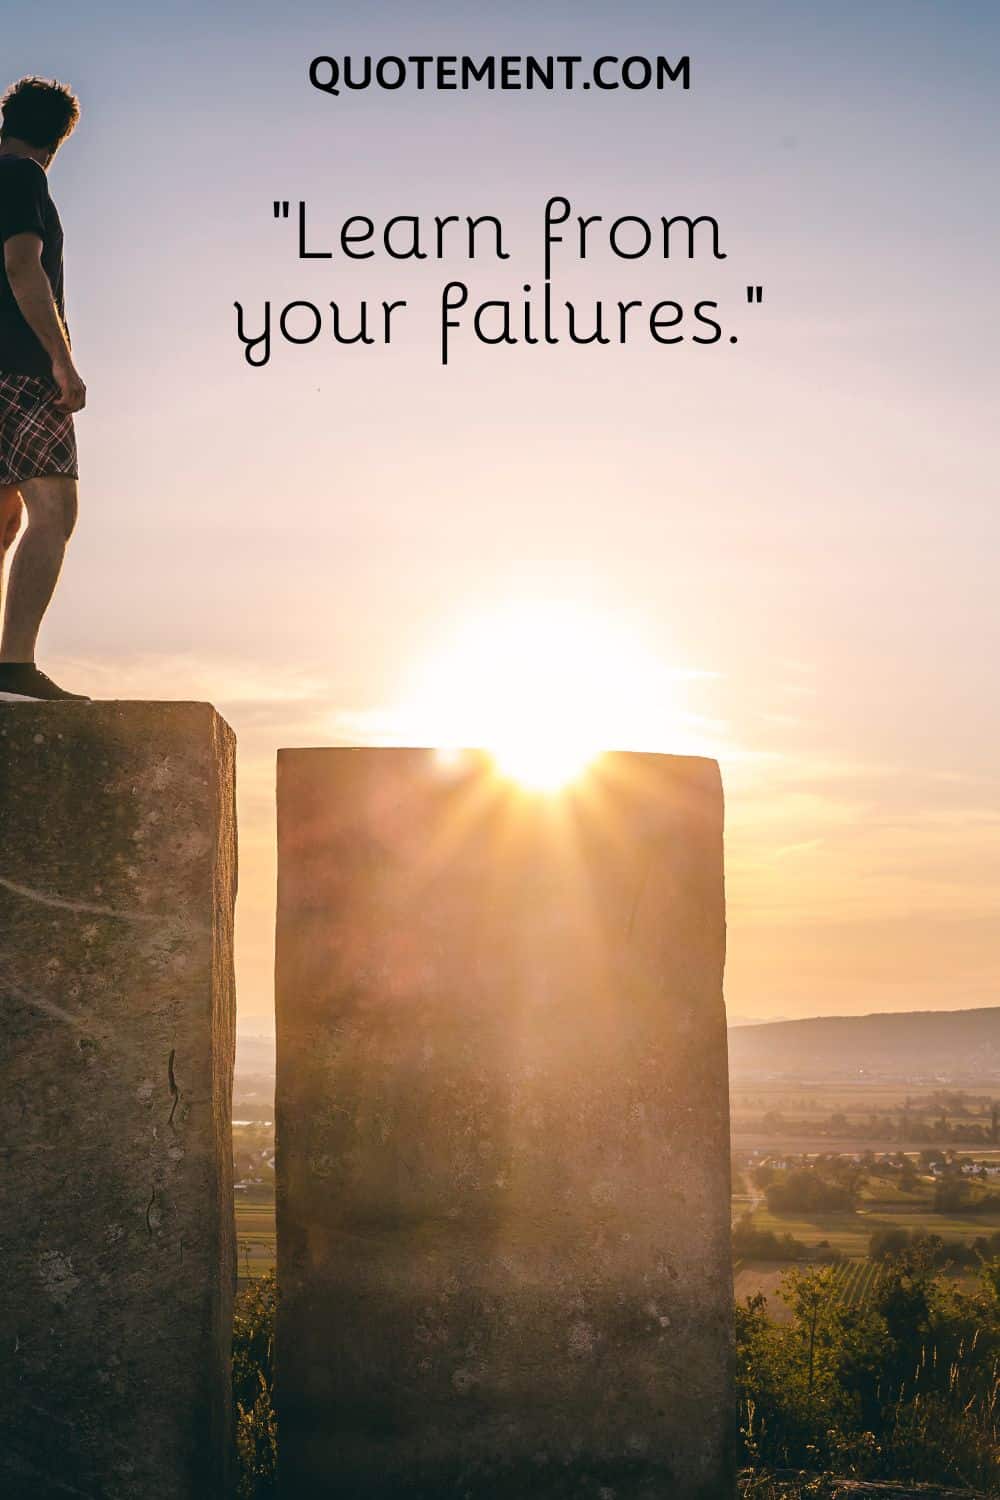 Learn from your failures